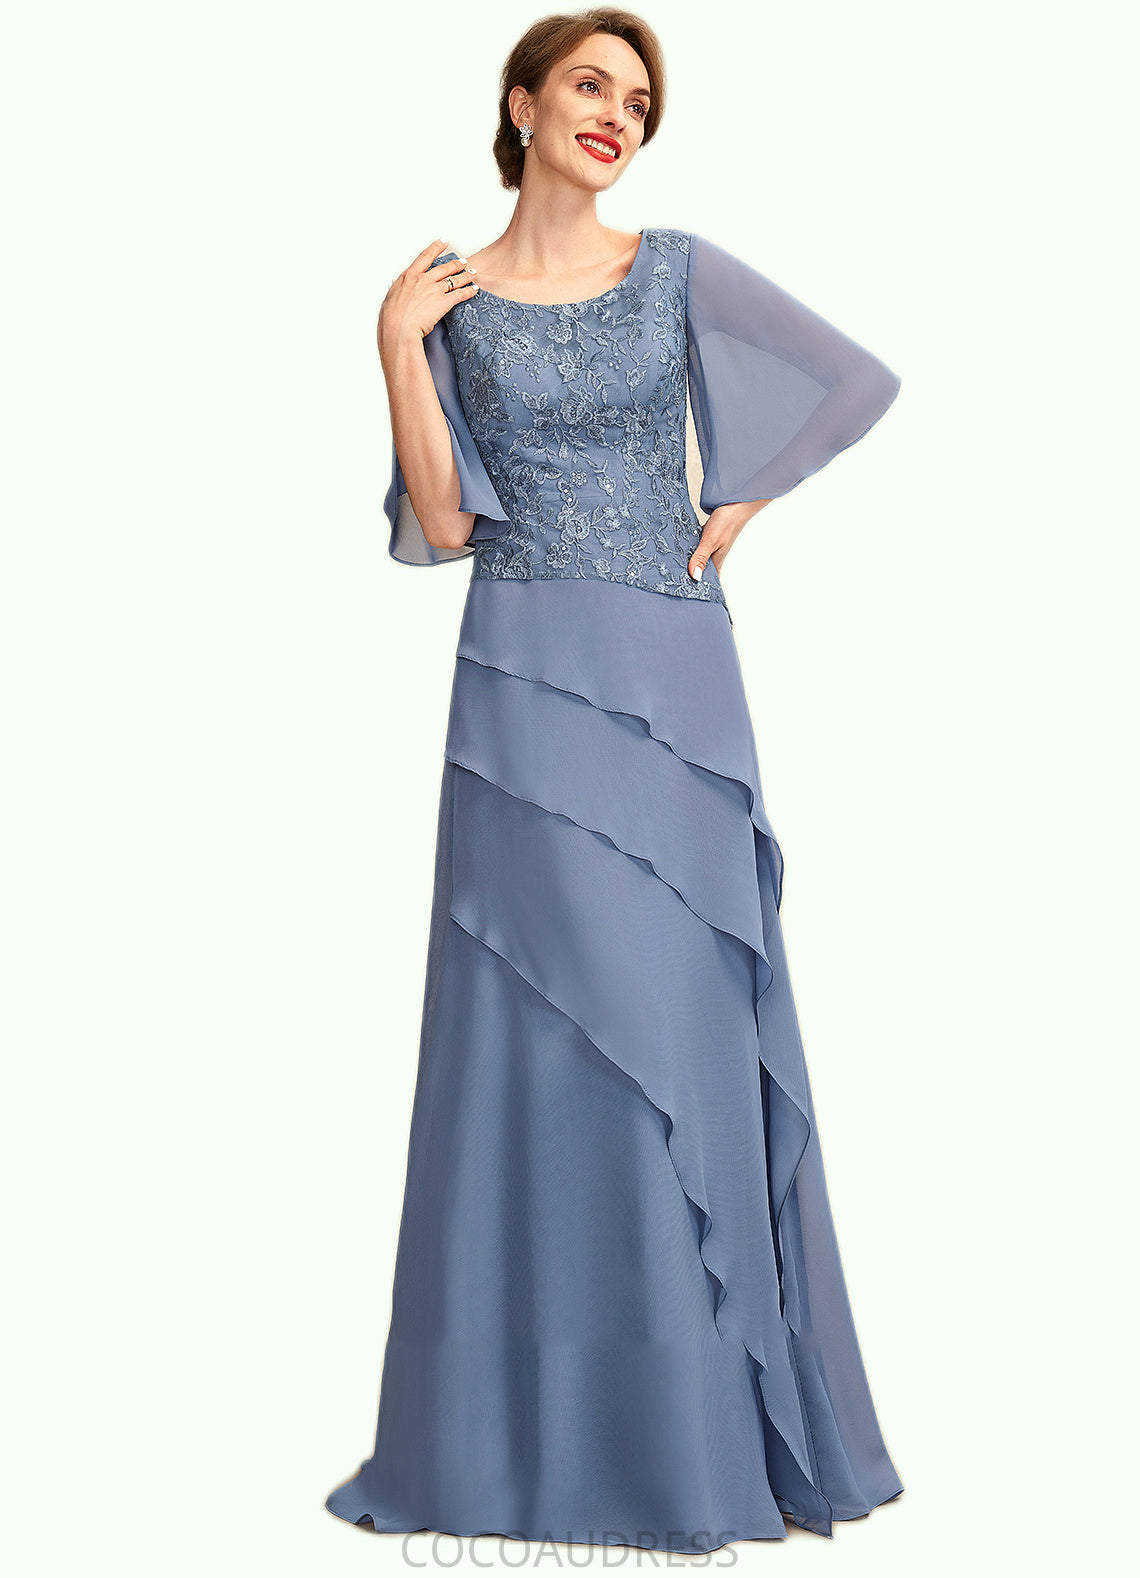 Anya A-Line Scoop Neck Floor-Length Chiffon Lace Mother of the Bride Dress With Sequins Cascading Ruffles 126P0014997